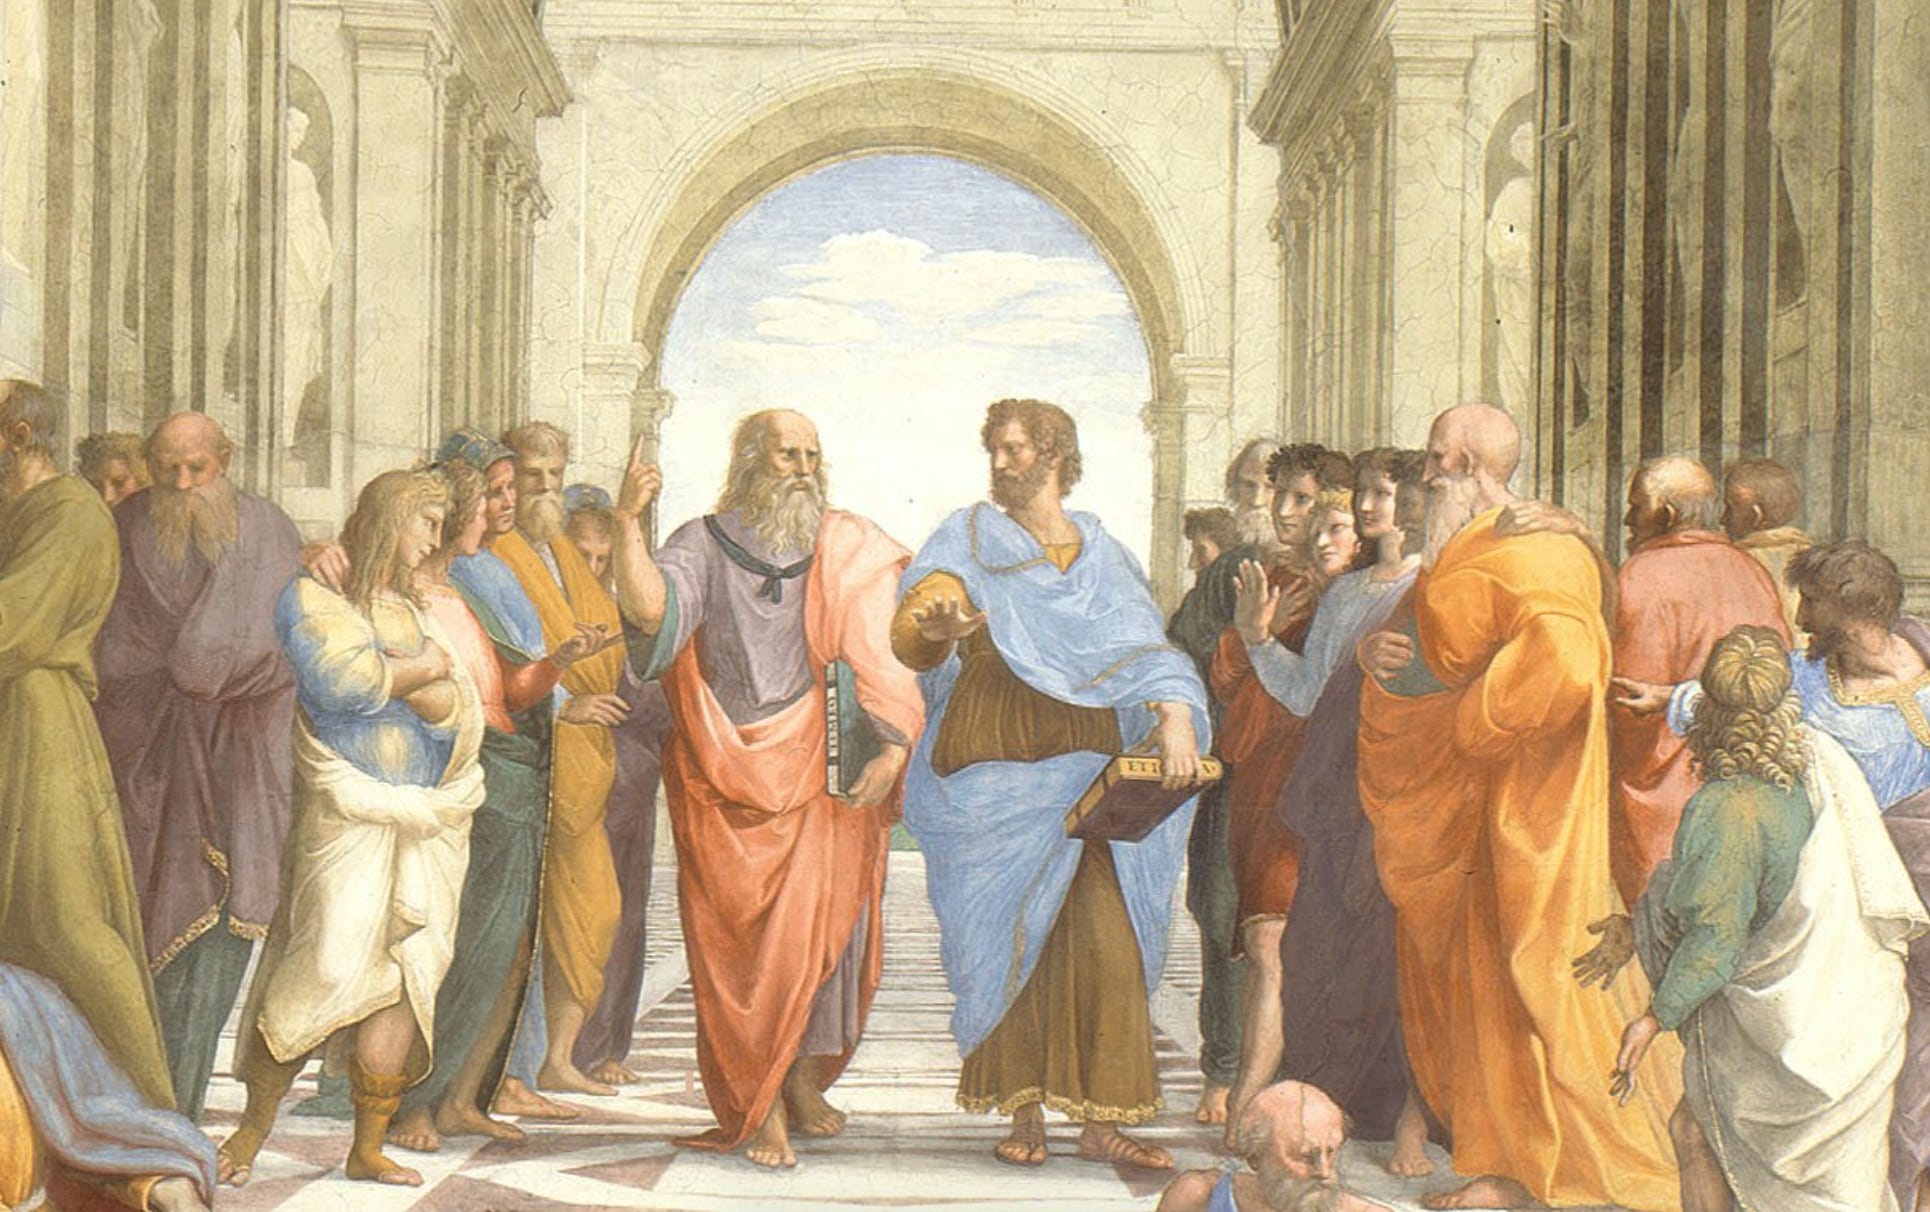 Detail of Raphael's The School of Athens, with the closeup of Plato and Aristotle in dialogue